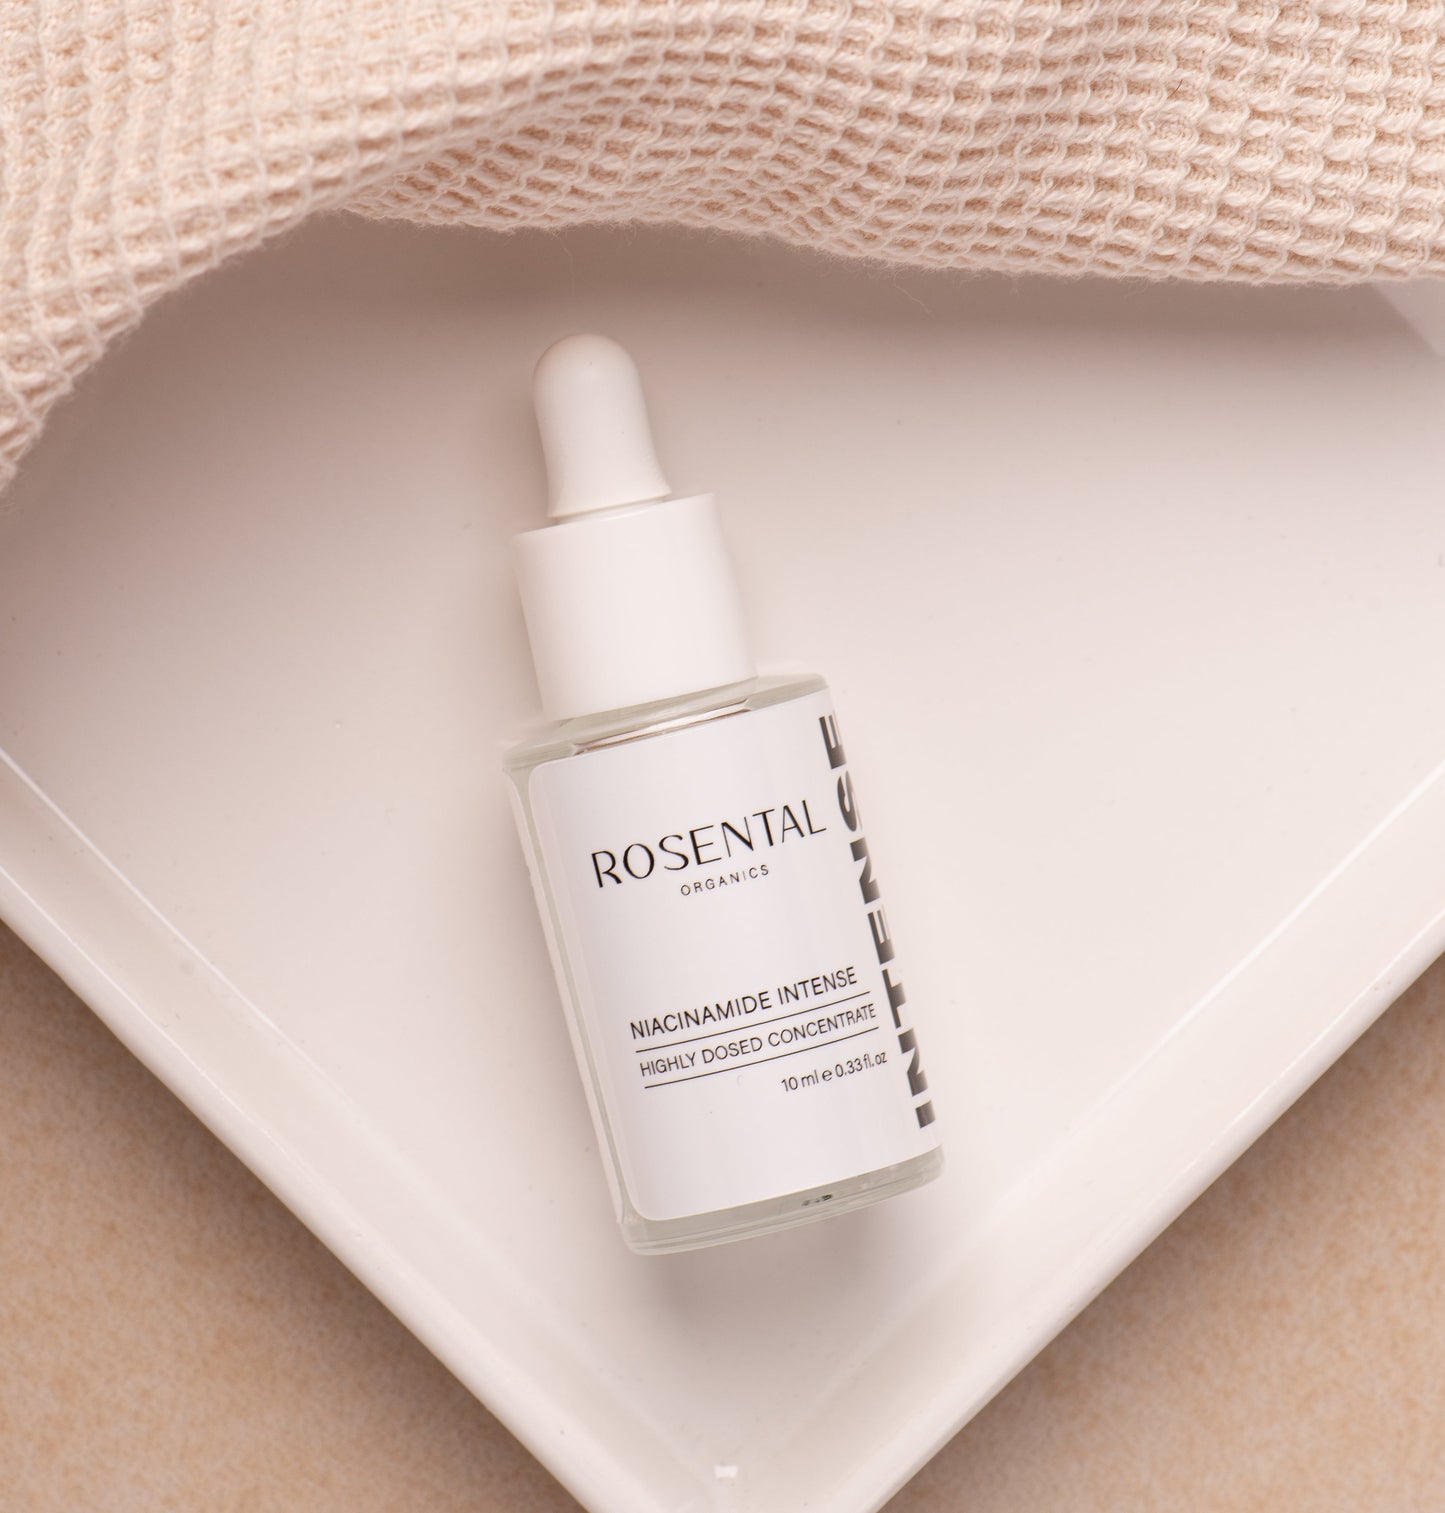 Niacinamide Intense Serum | Highly Dosed Concentrate